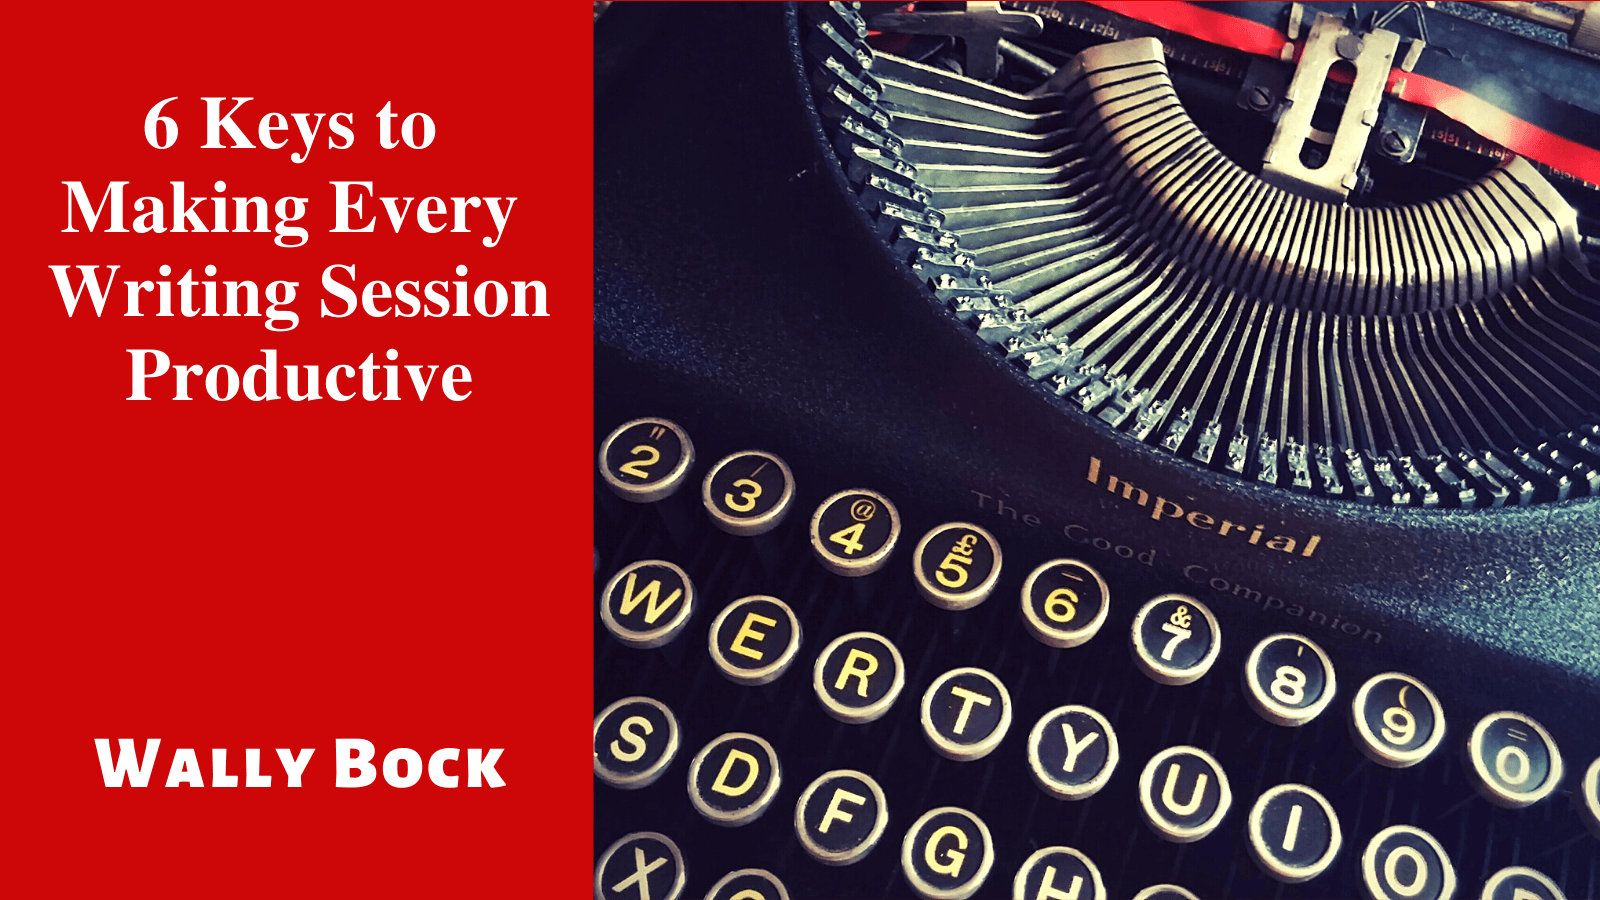 6 Keys to Making Every Writing Session Productive